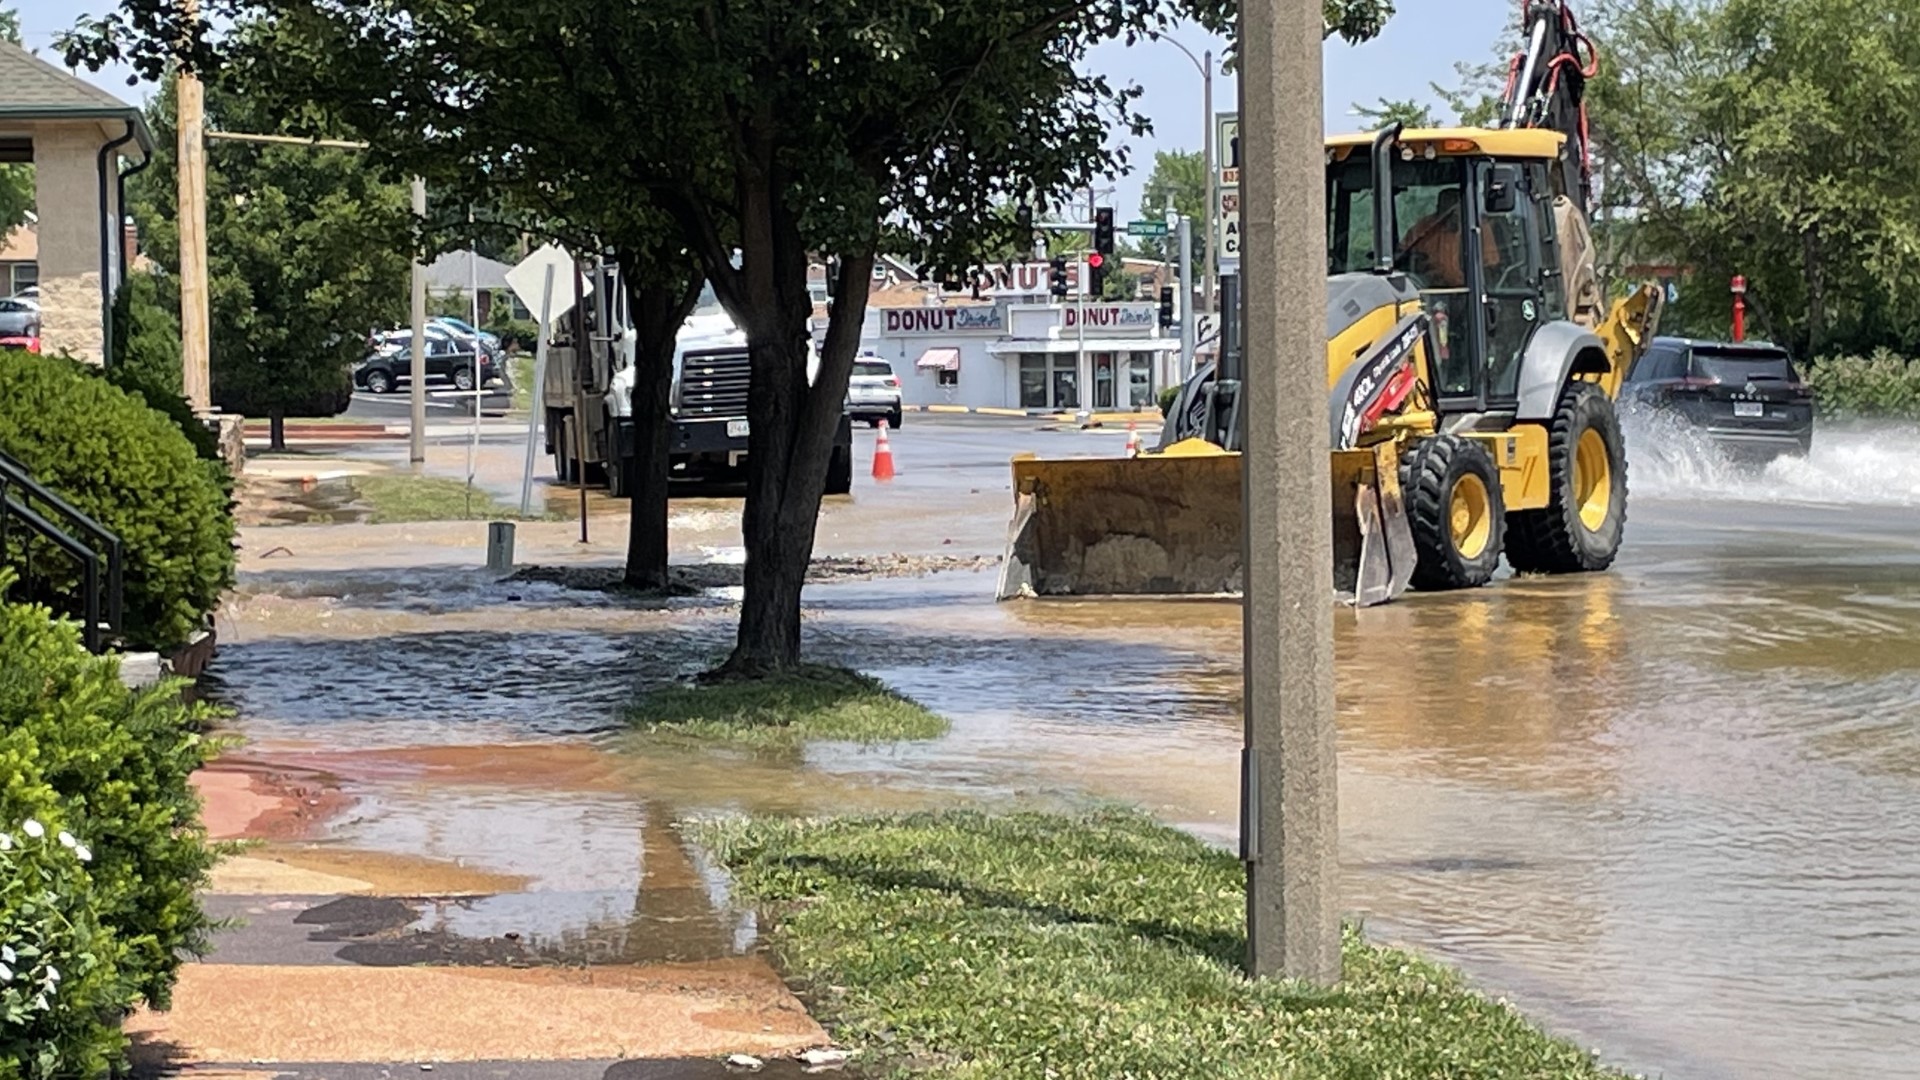 The 20-inch water main break happened at the intersection of Lansdowne Avenue and Chippewa Street. A precautionary boil advisory was issued for areas in south city.